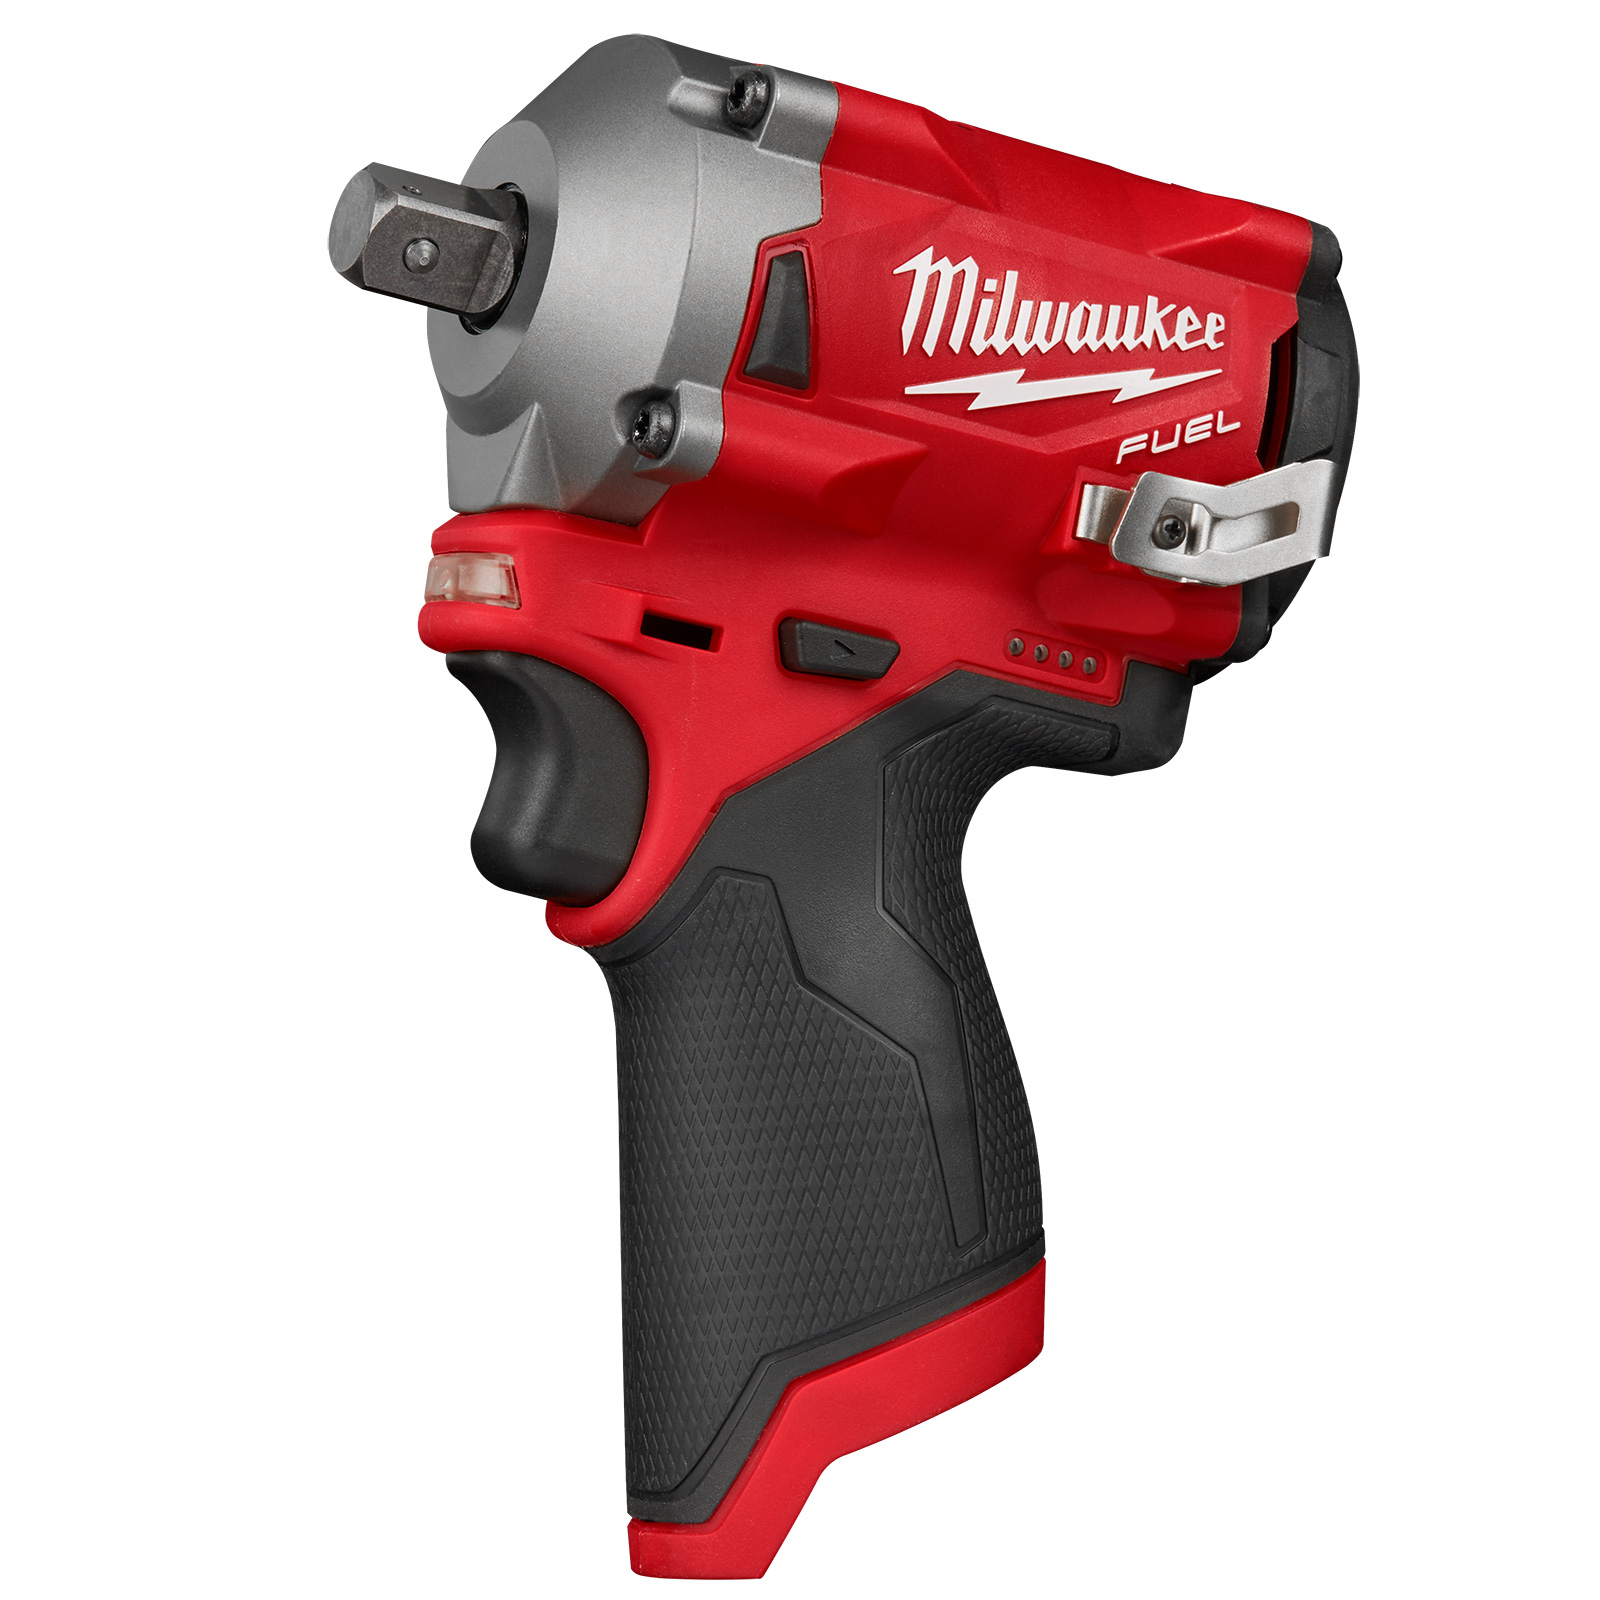 Milwaukee 12V Fuel 1/2" Brushless Stubby Impact Wrench w/Pin Detent (tool only) M12FIWP12-0